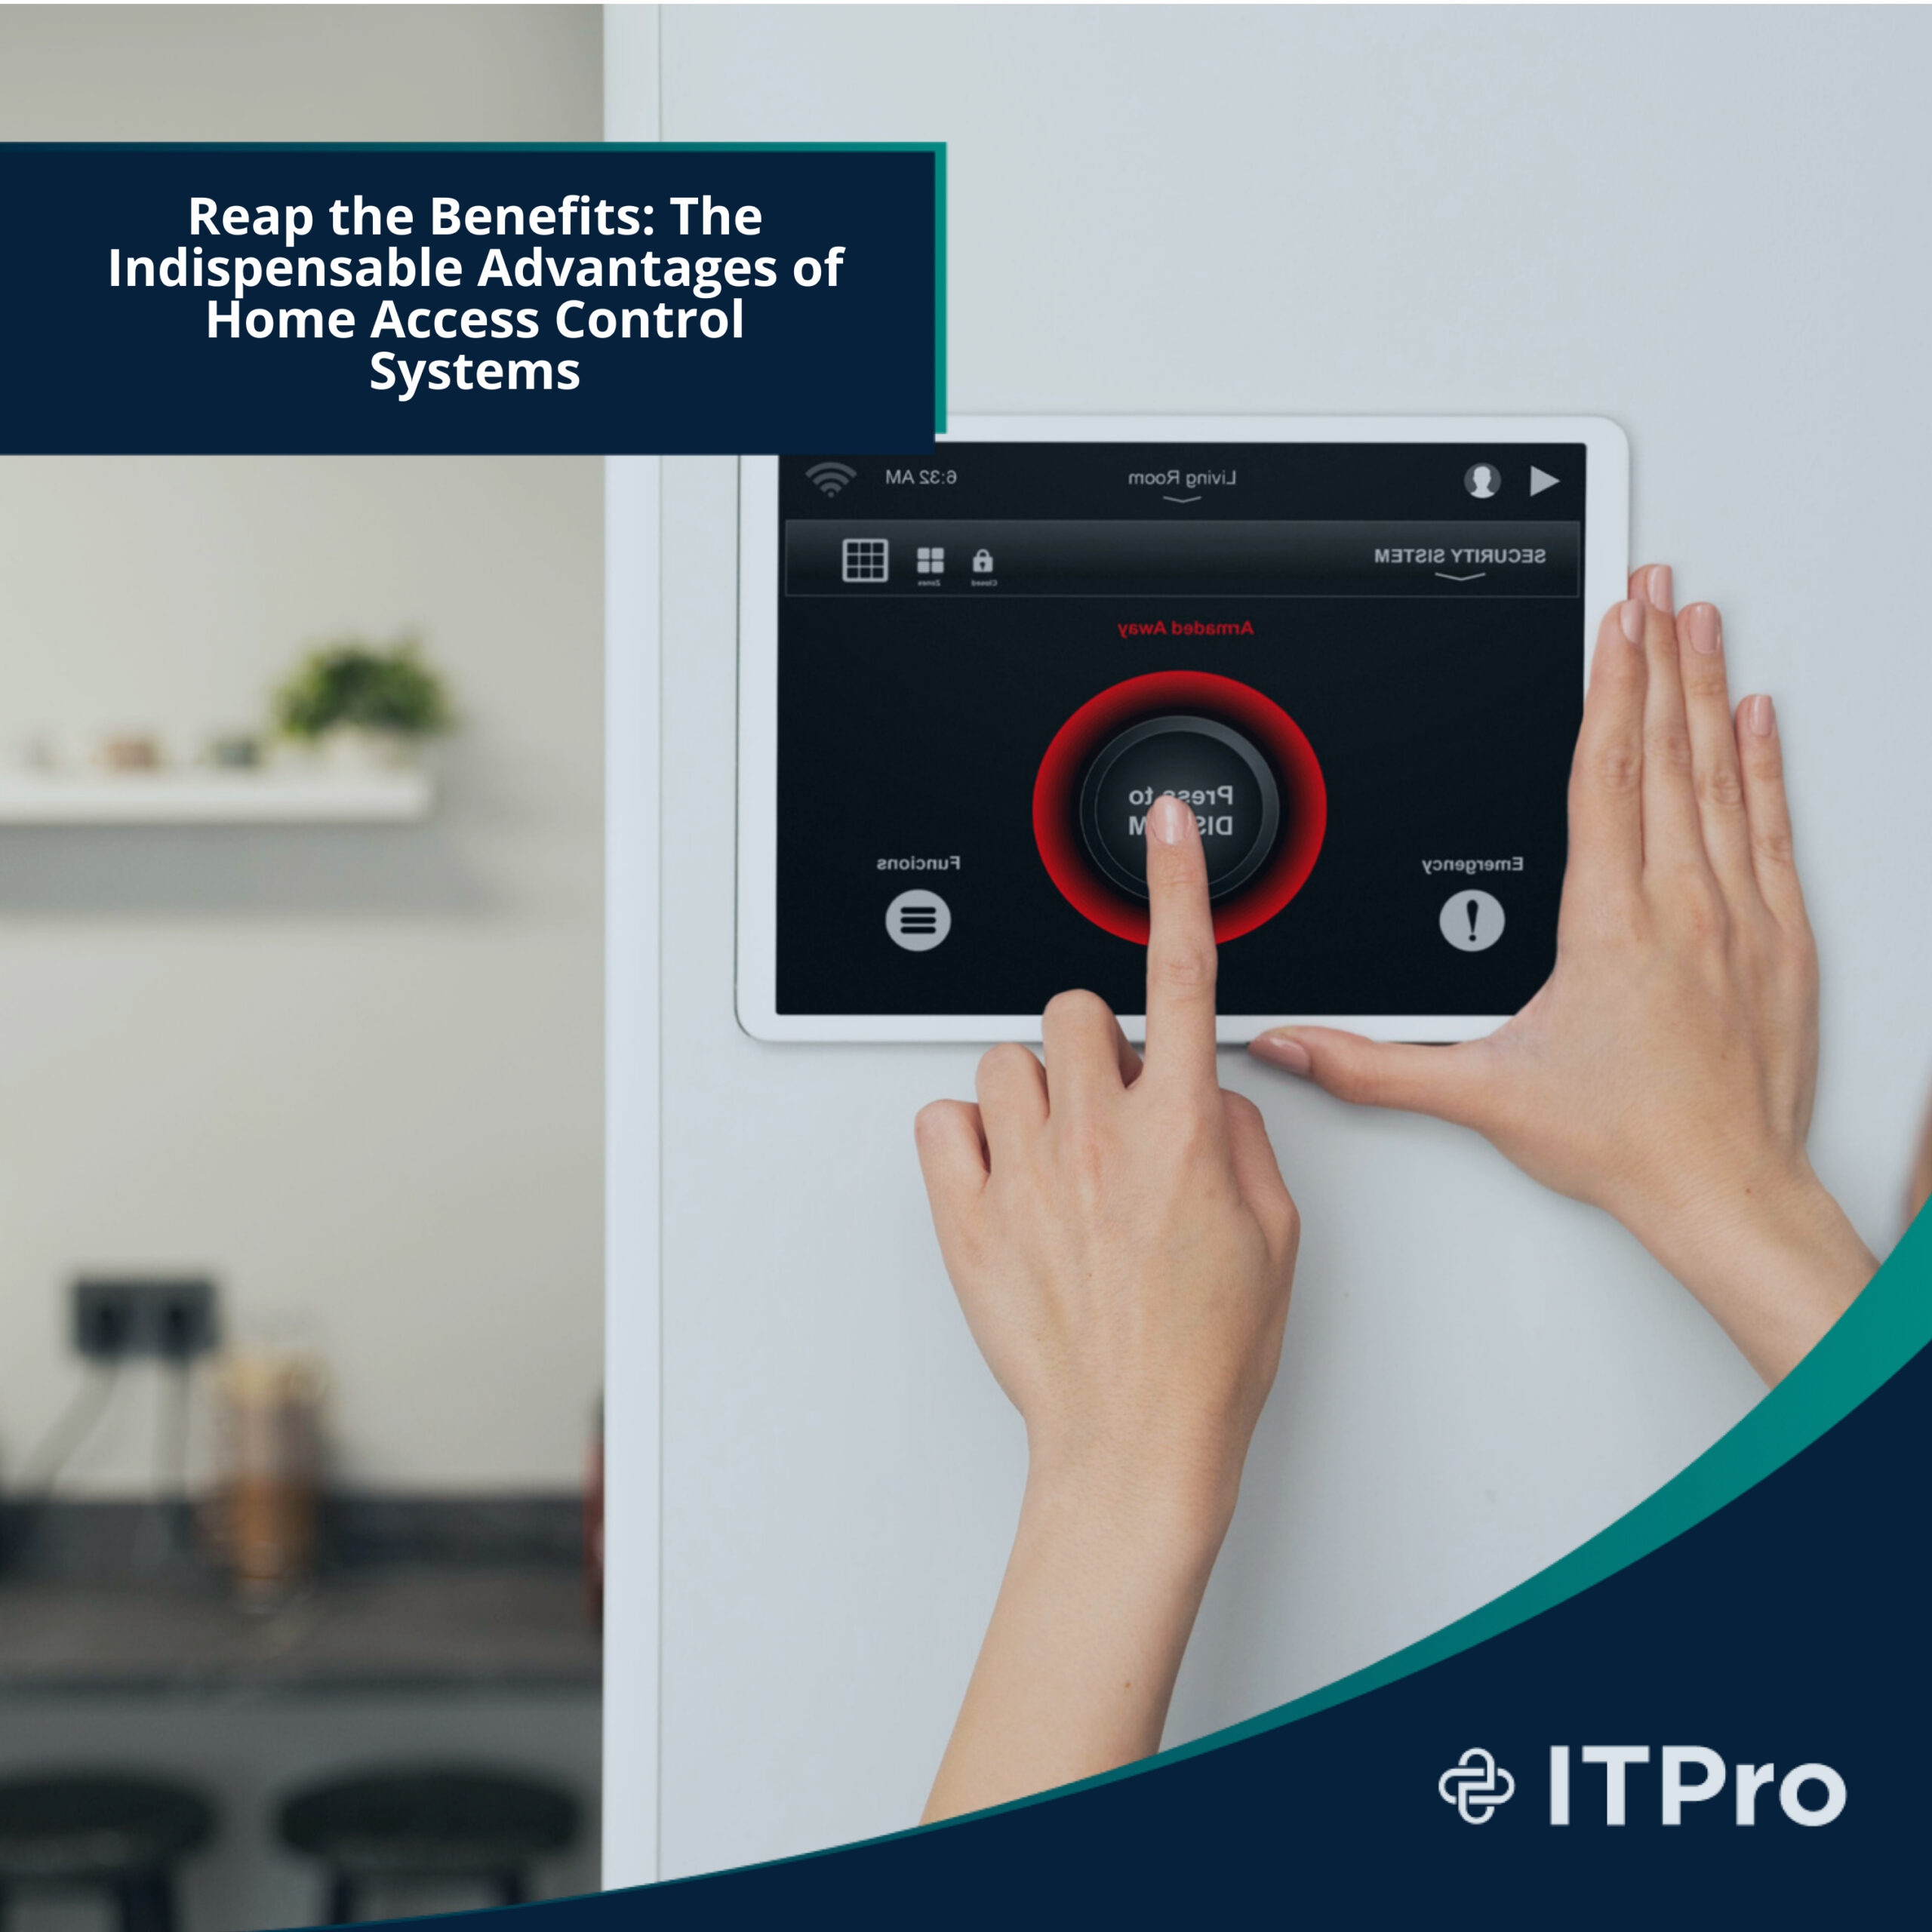 Reap the Benefits: The Indispensable Advantages of Home Access Control Systems